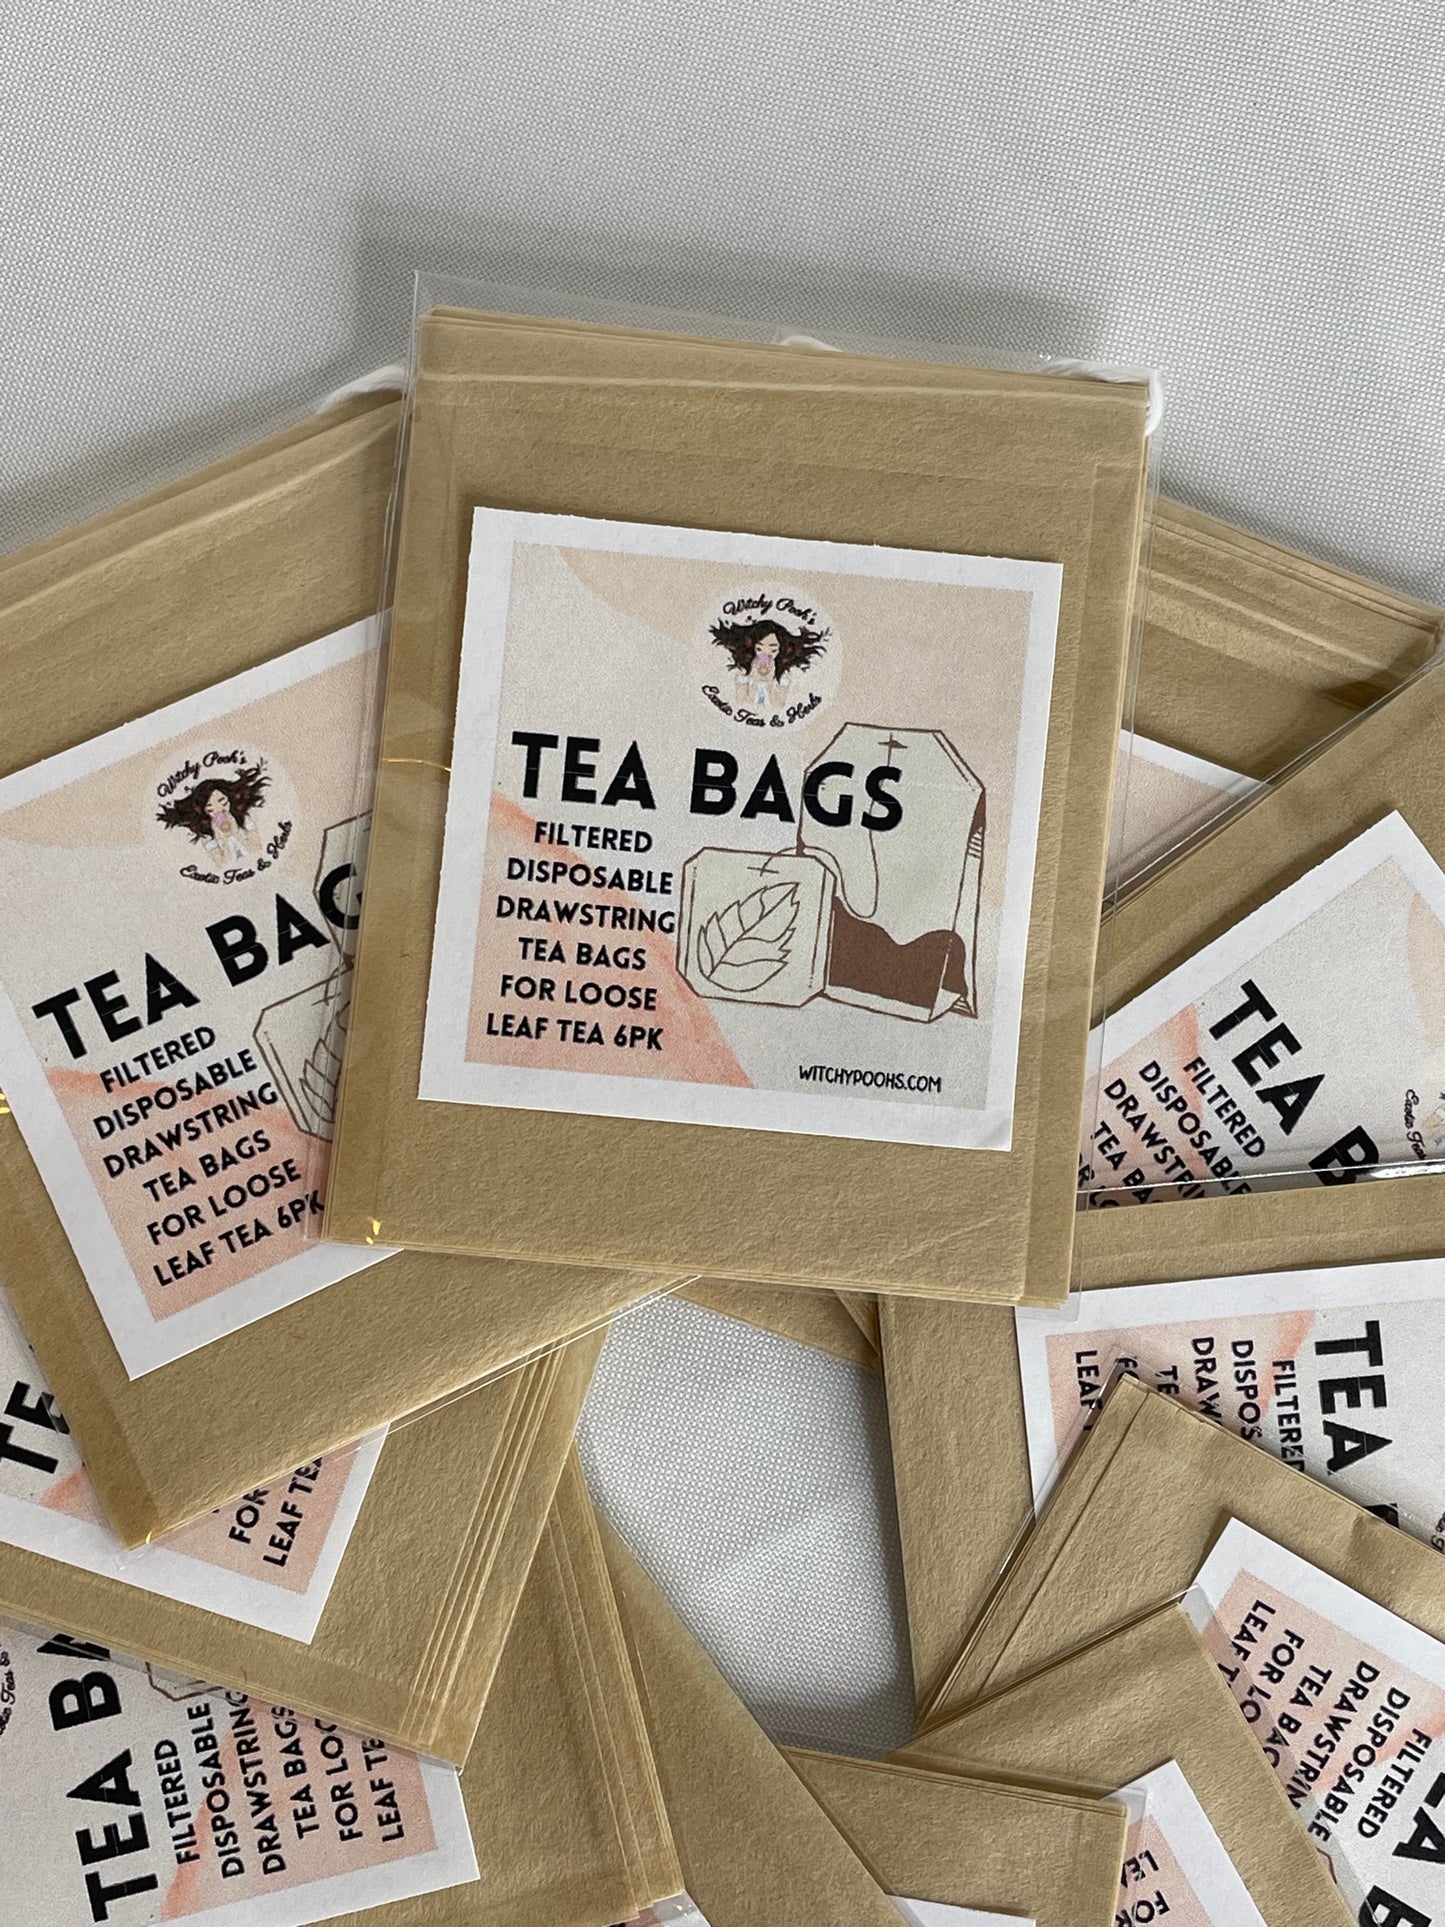 Witchy Pooh's Tea Bags for Loose Leaf Tea, 6 pack, Filtered, Disposable, Drawstring